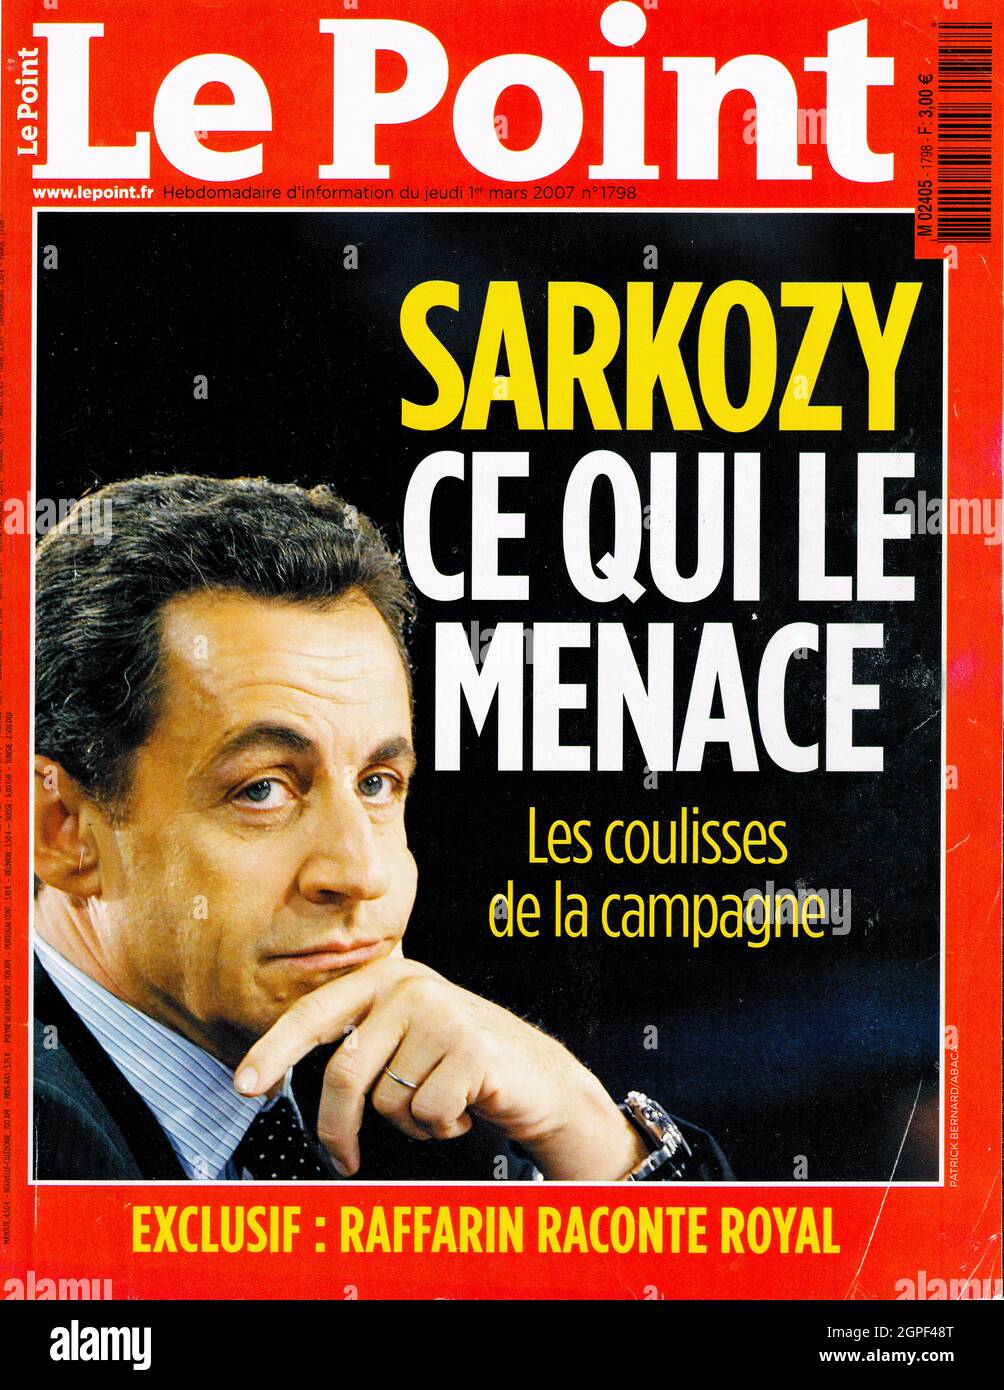 Le Point, Frontpage reading "Can Sarkozy loose ?", France, March 1 2007 Stock Photo